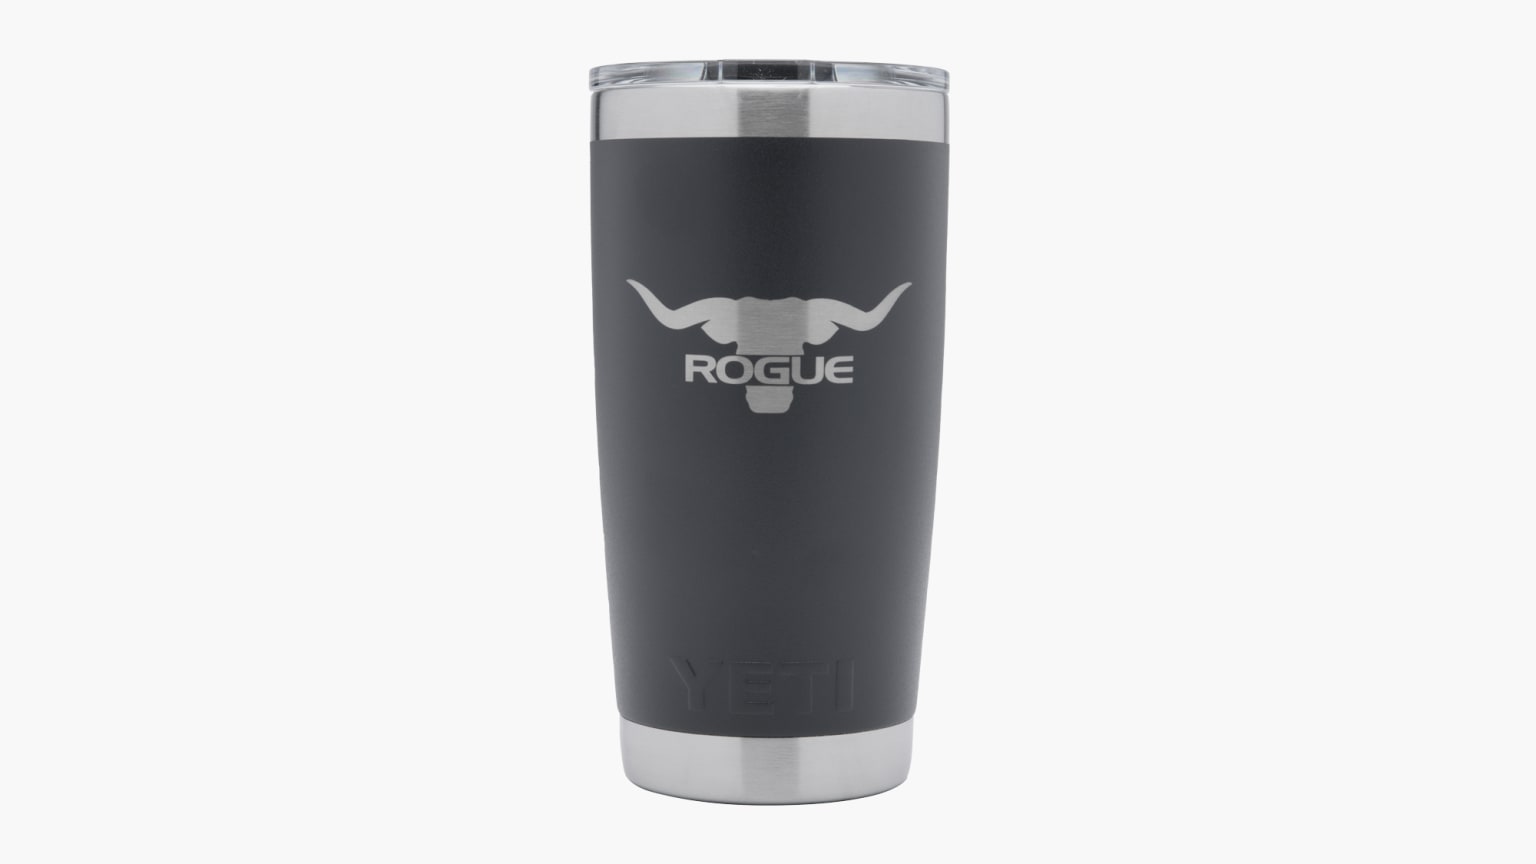 https://assets.roguefitness.com/f_auto,q_auto,c_limit,w_1536,b_rgb:f8f8f8/catalog/Gear%20and%20Accessories/Accessories/Shakers%20and%20Bottles/YT0106/YT0106-H_du2kva.png